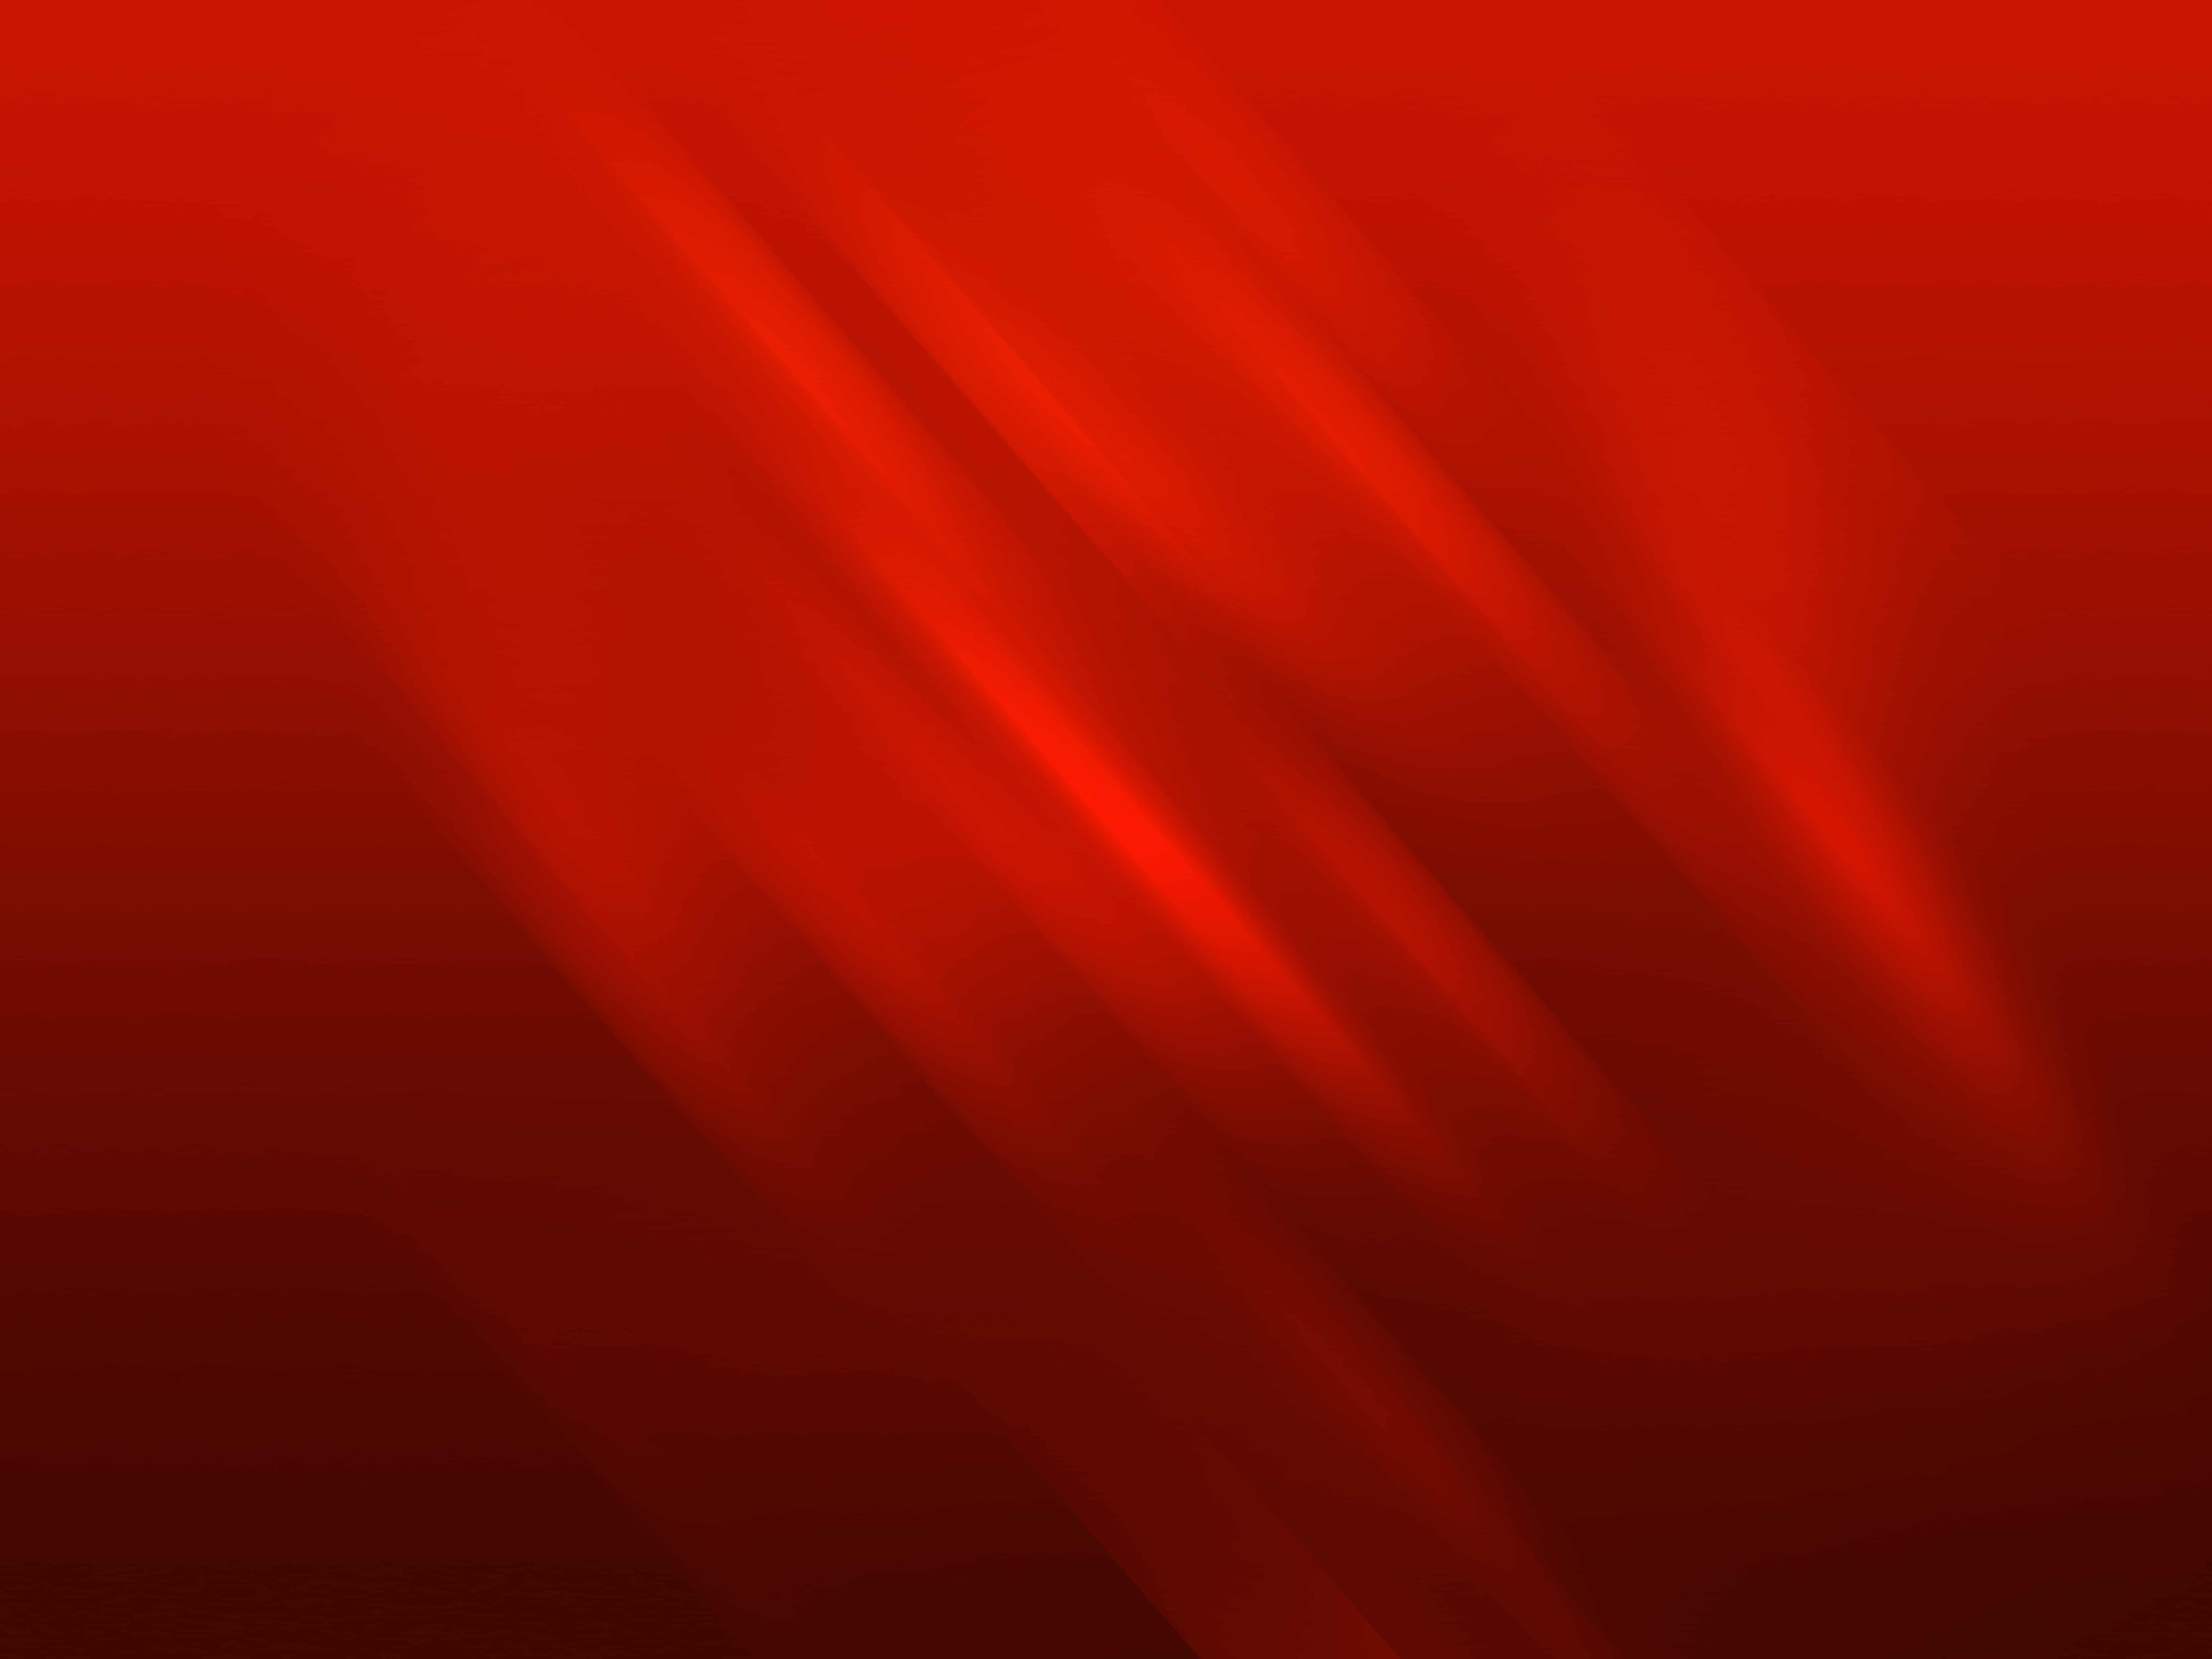 http://www.lifebysoul.com/wp-content/uploads/2017/07/abstract-red-background-134_MytS5UY_.jpg